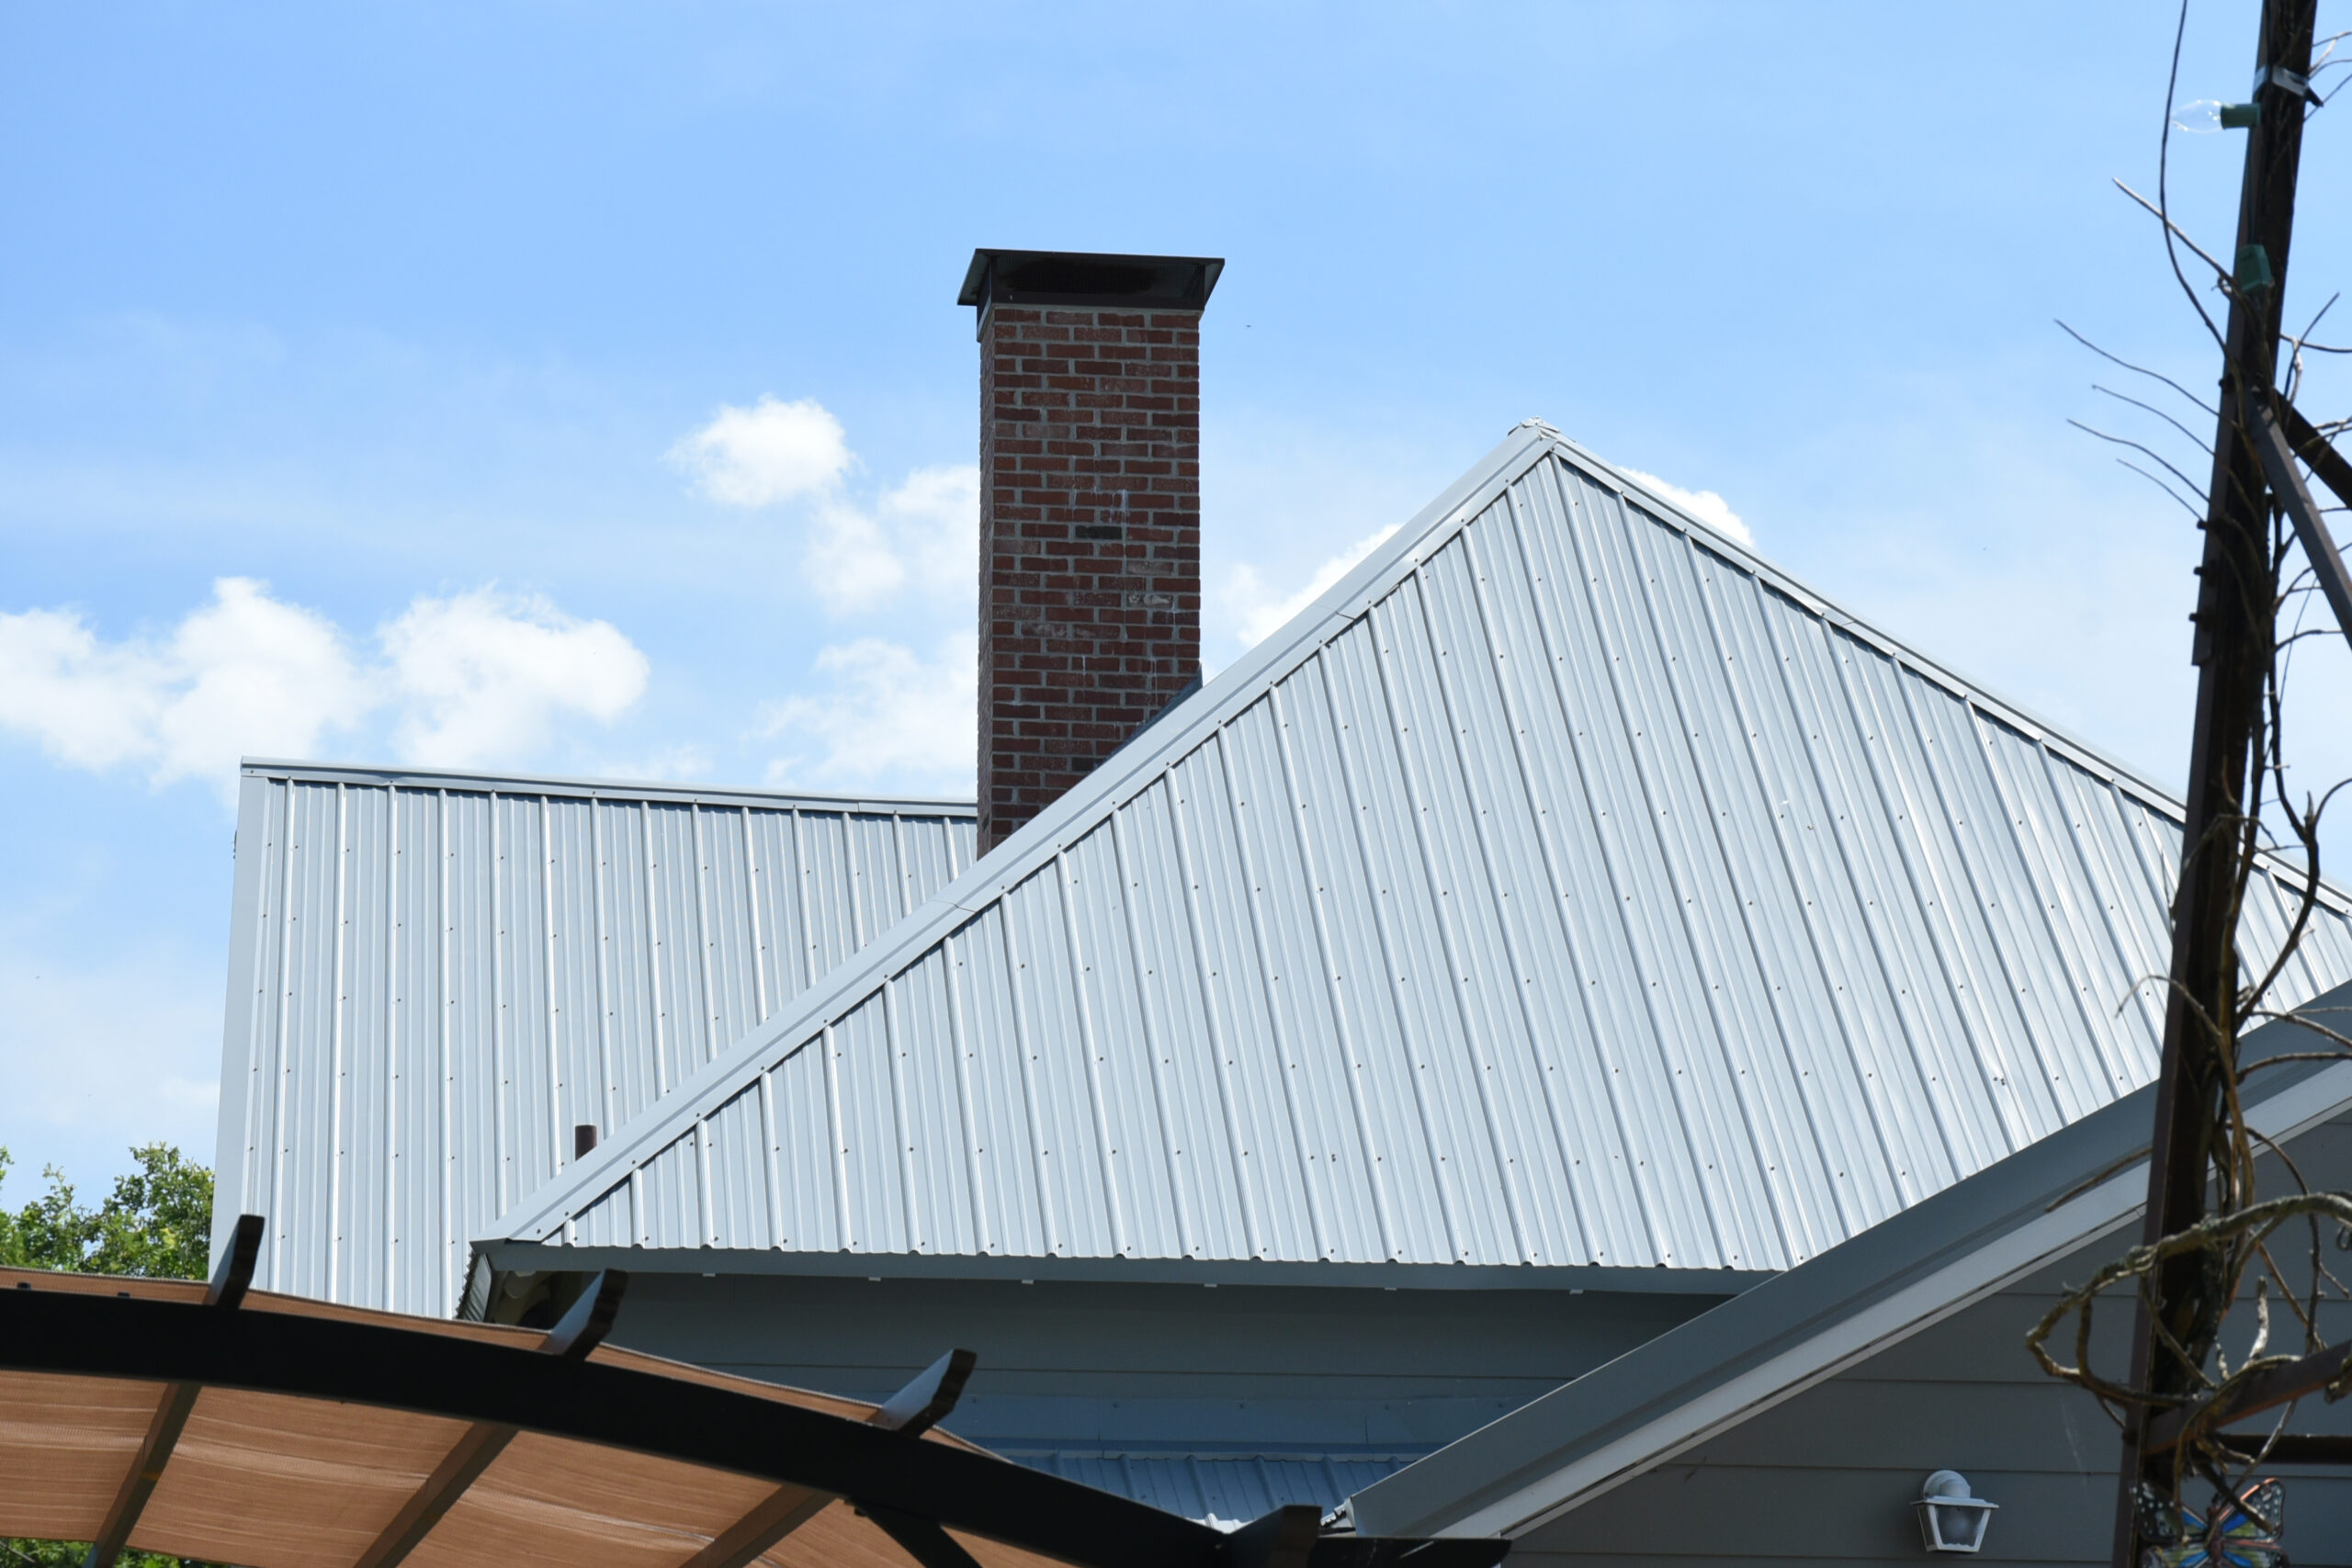 coors remodeling can replace the roofing on your home